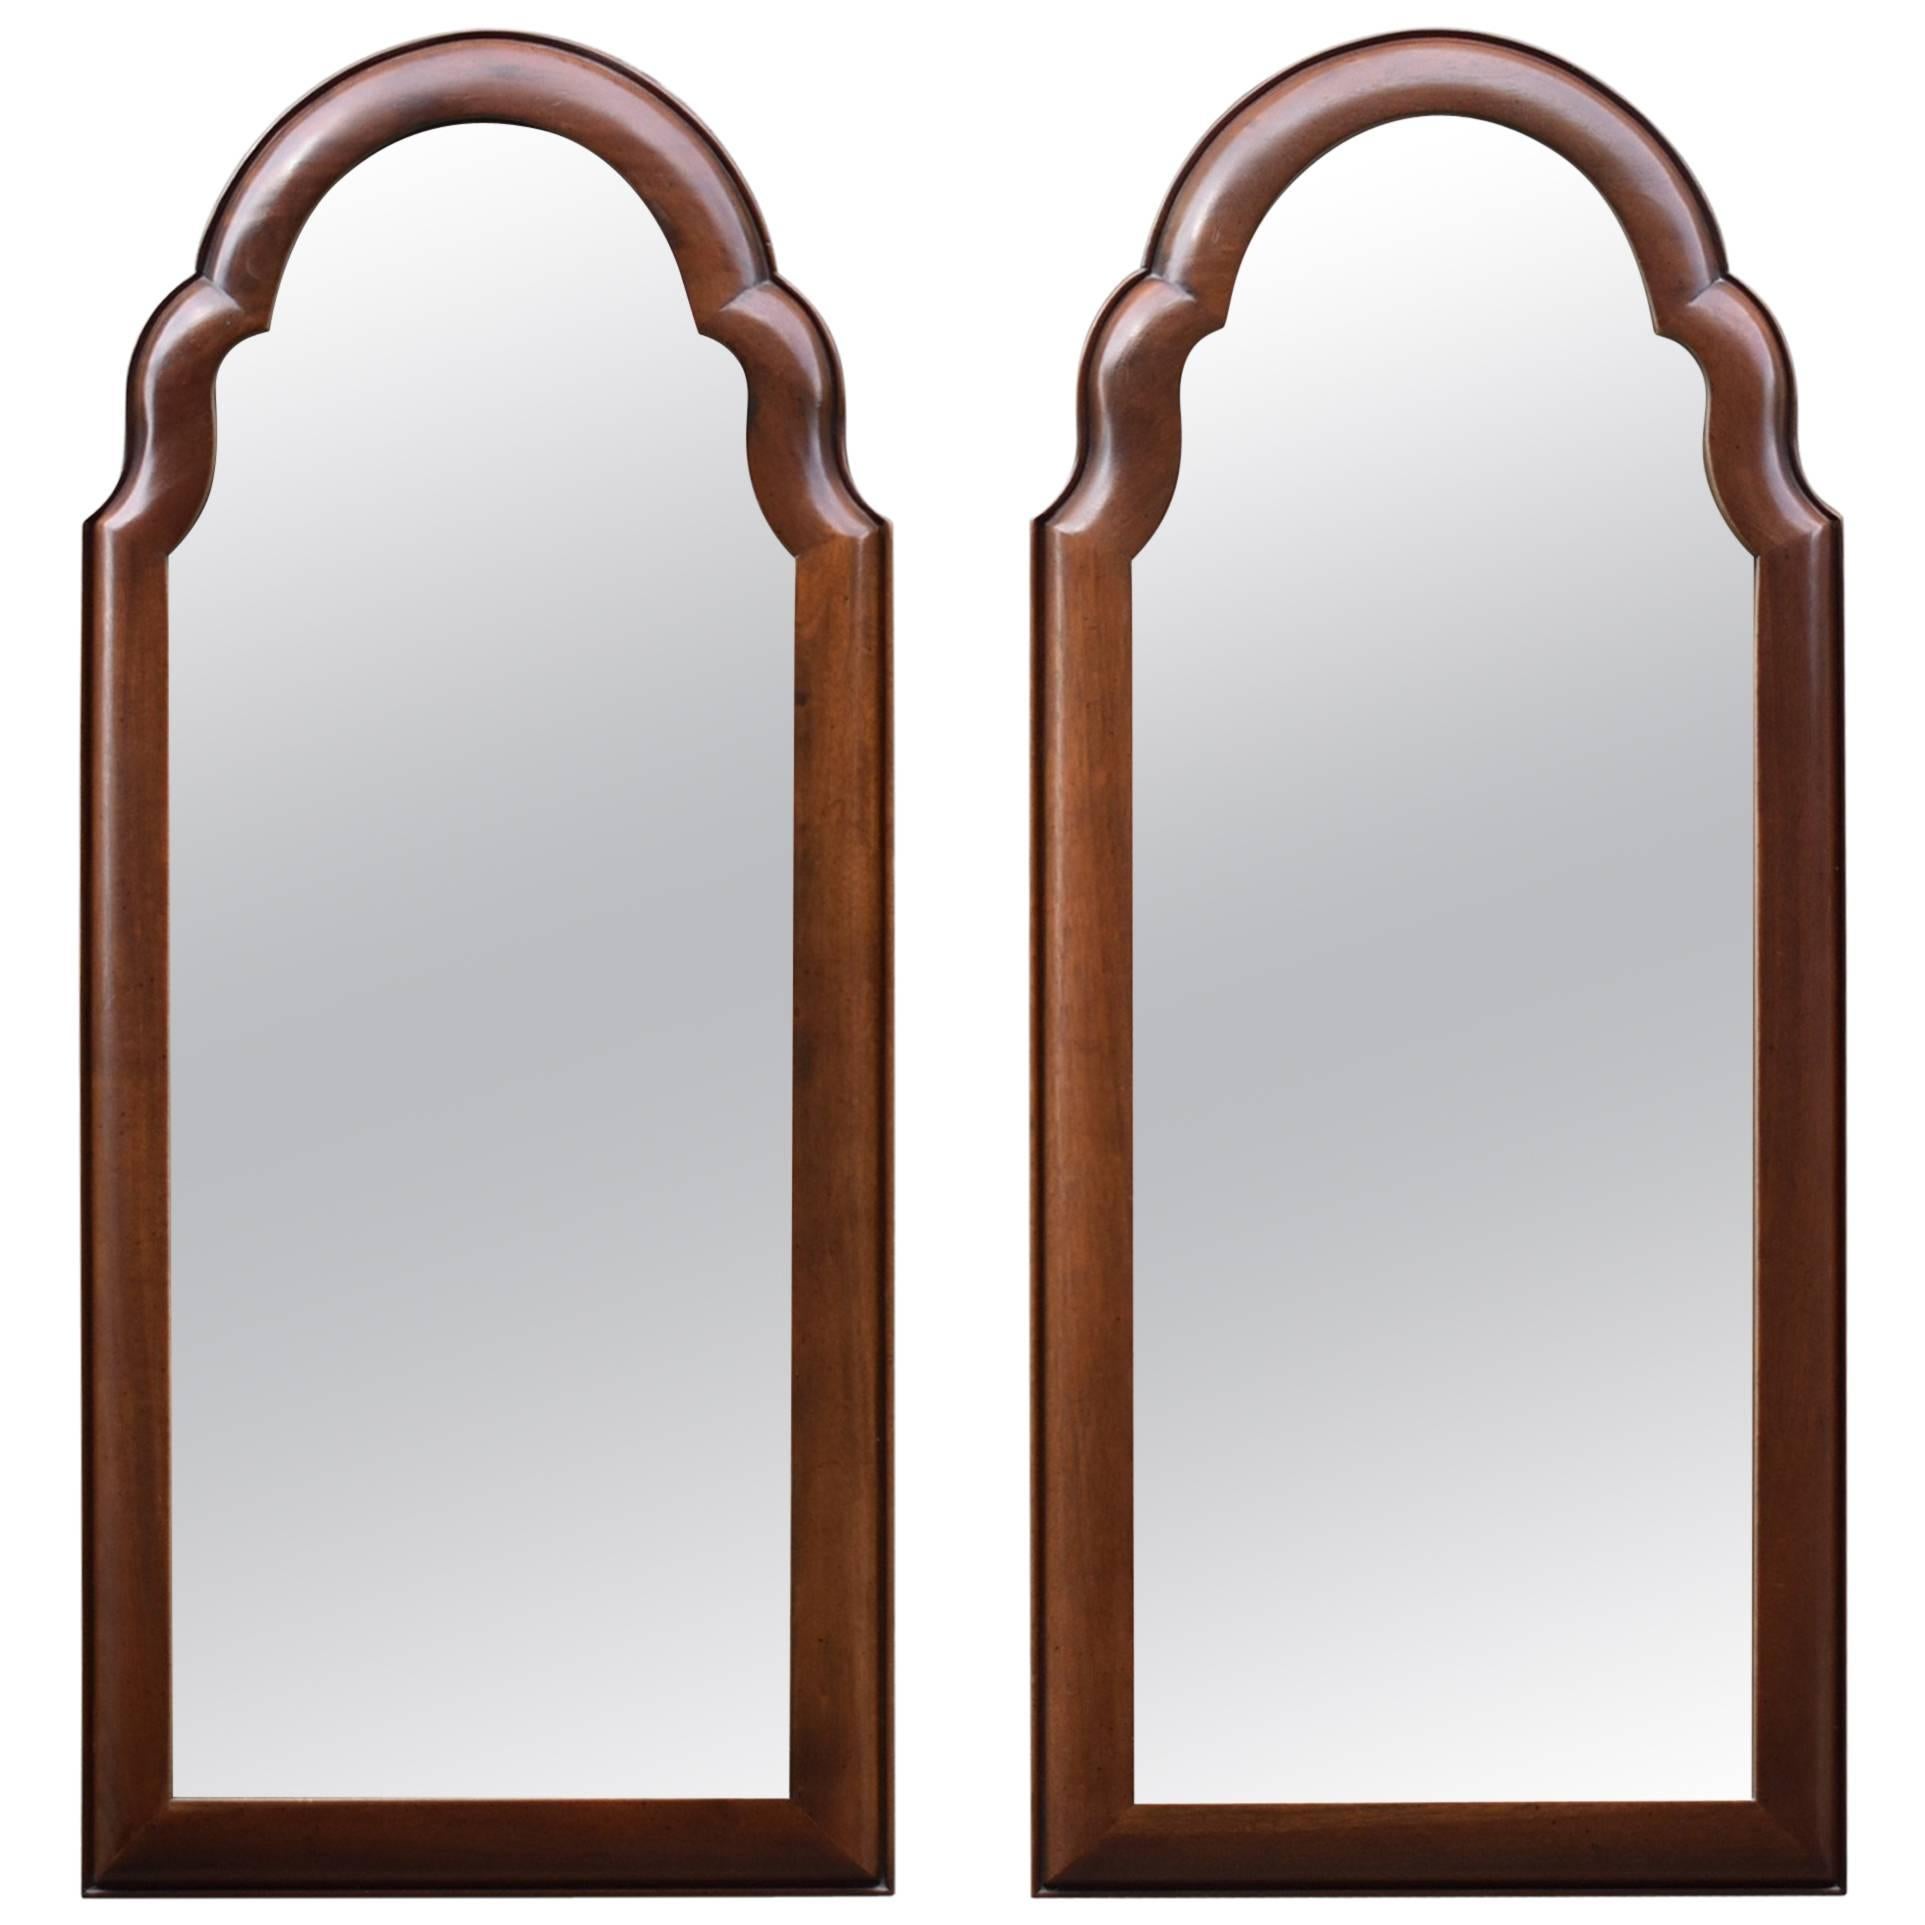 Pair of Walnut Mirrors by Century Furniture Reproduction Henry Ford Museum